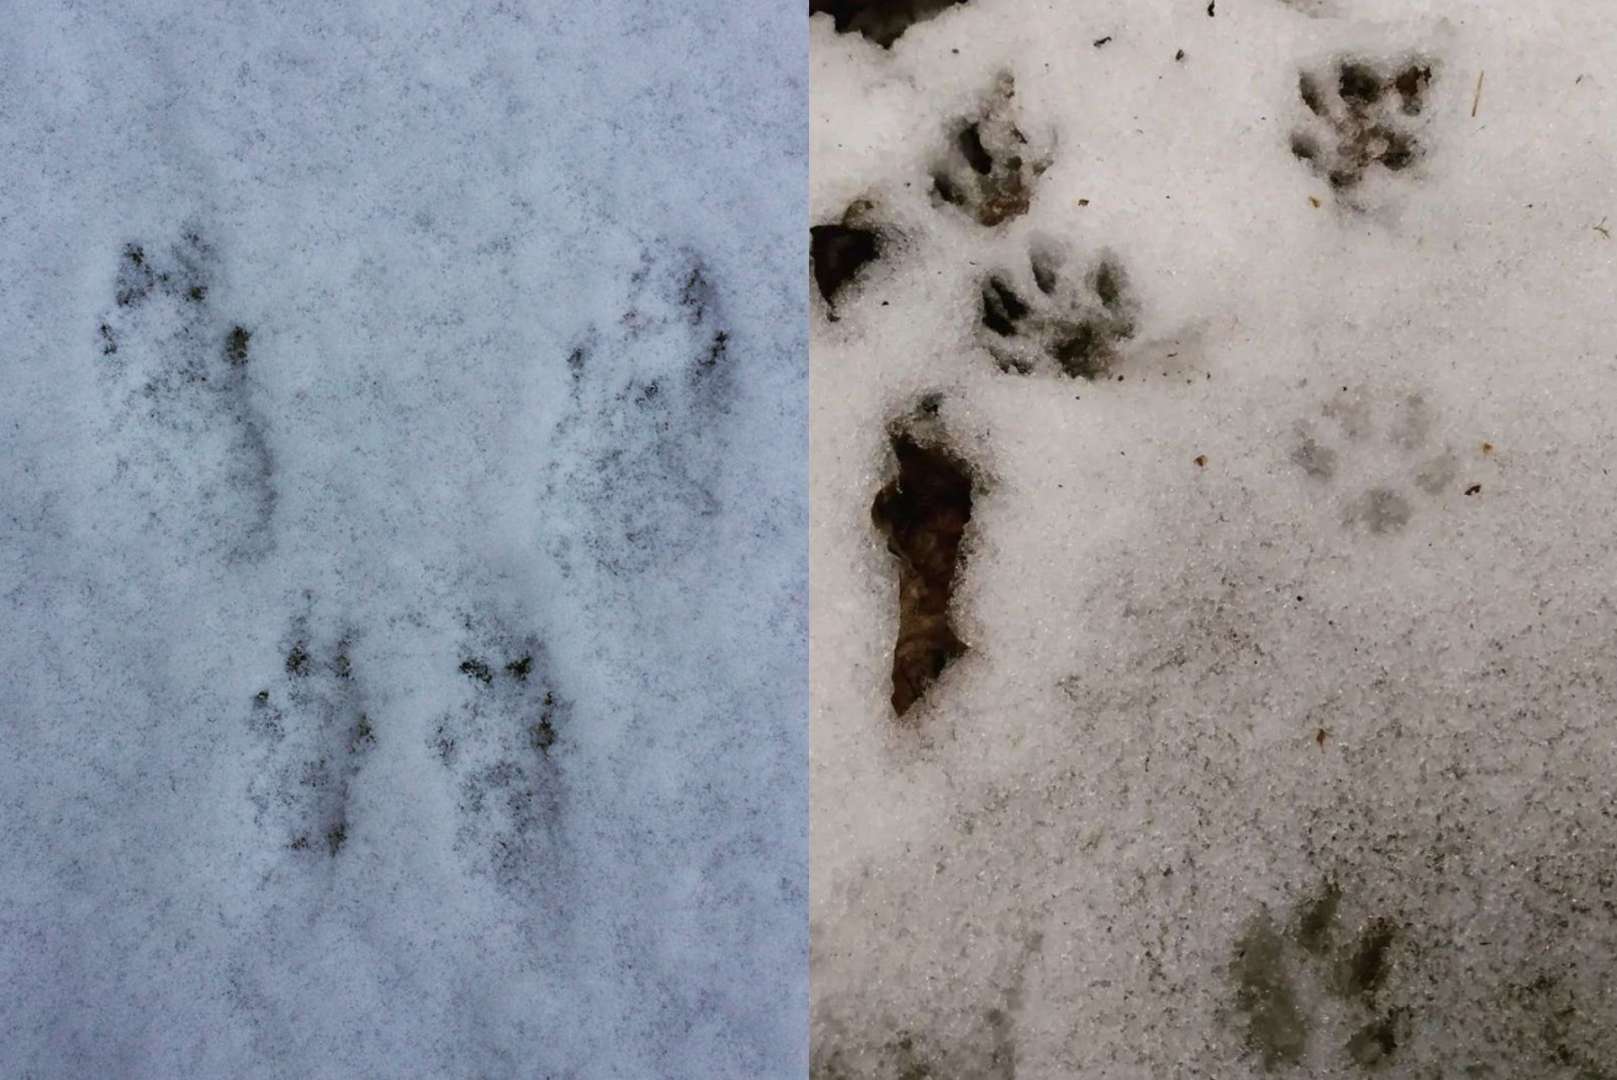 How To Identify Rabbit and Squirrel Tracks In The Snow？